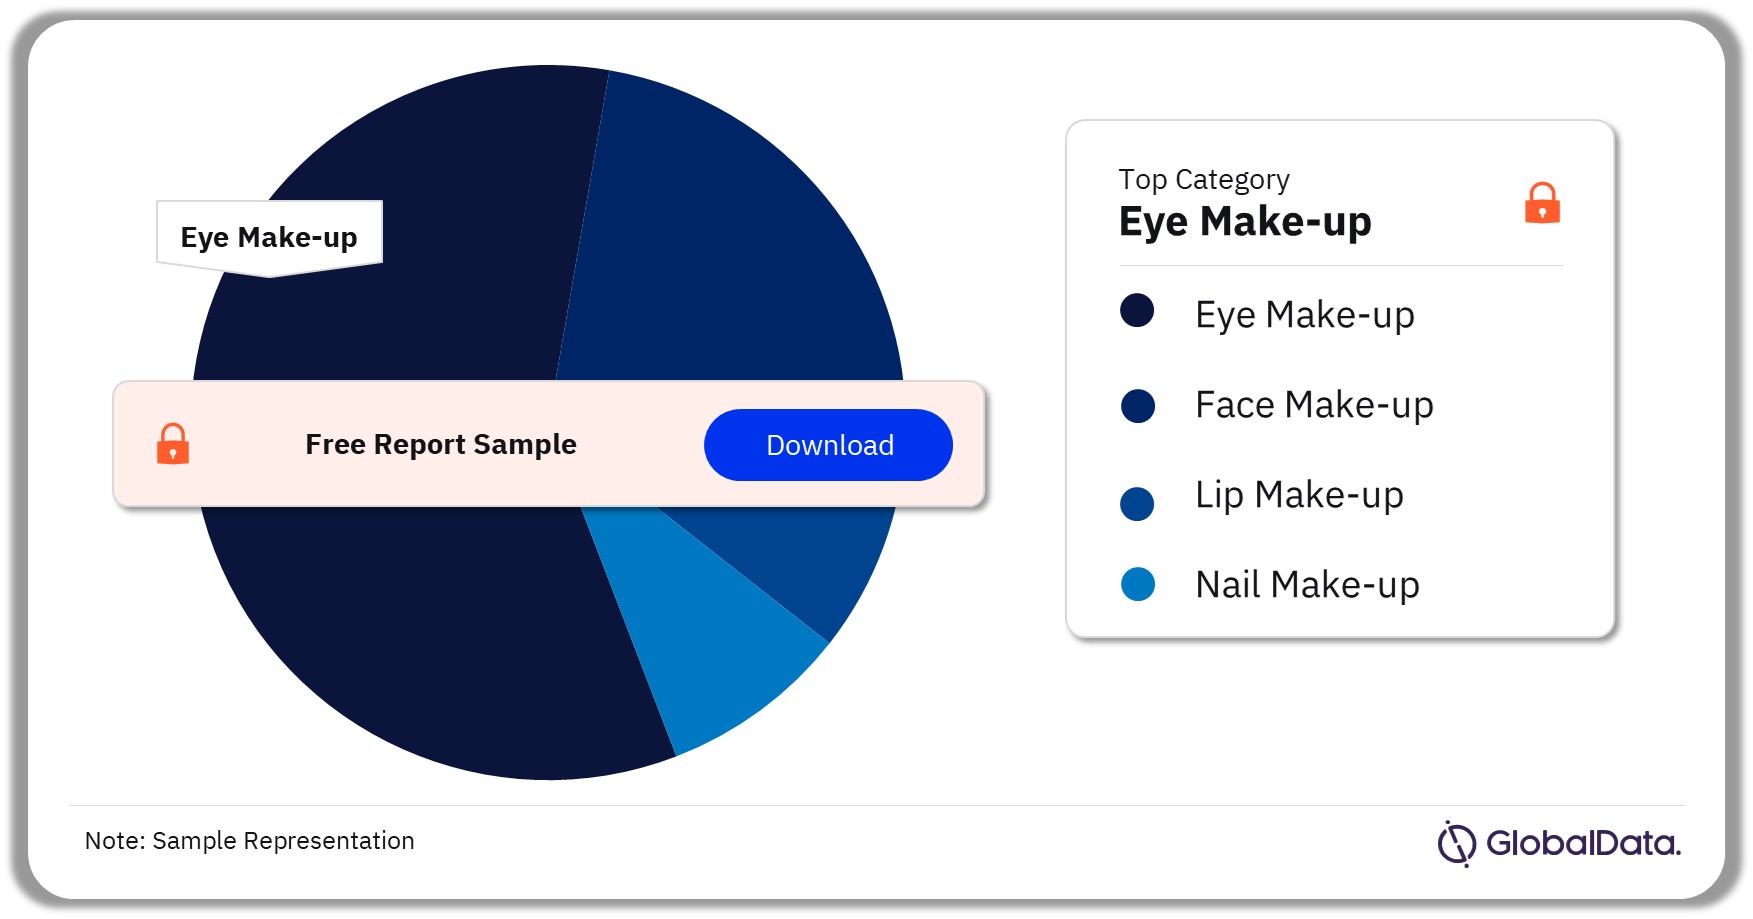 South Africa Make-up Market Analysis by Categories, 2021 (%)